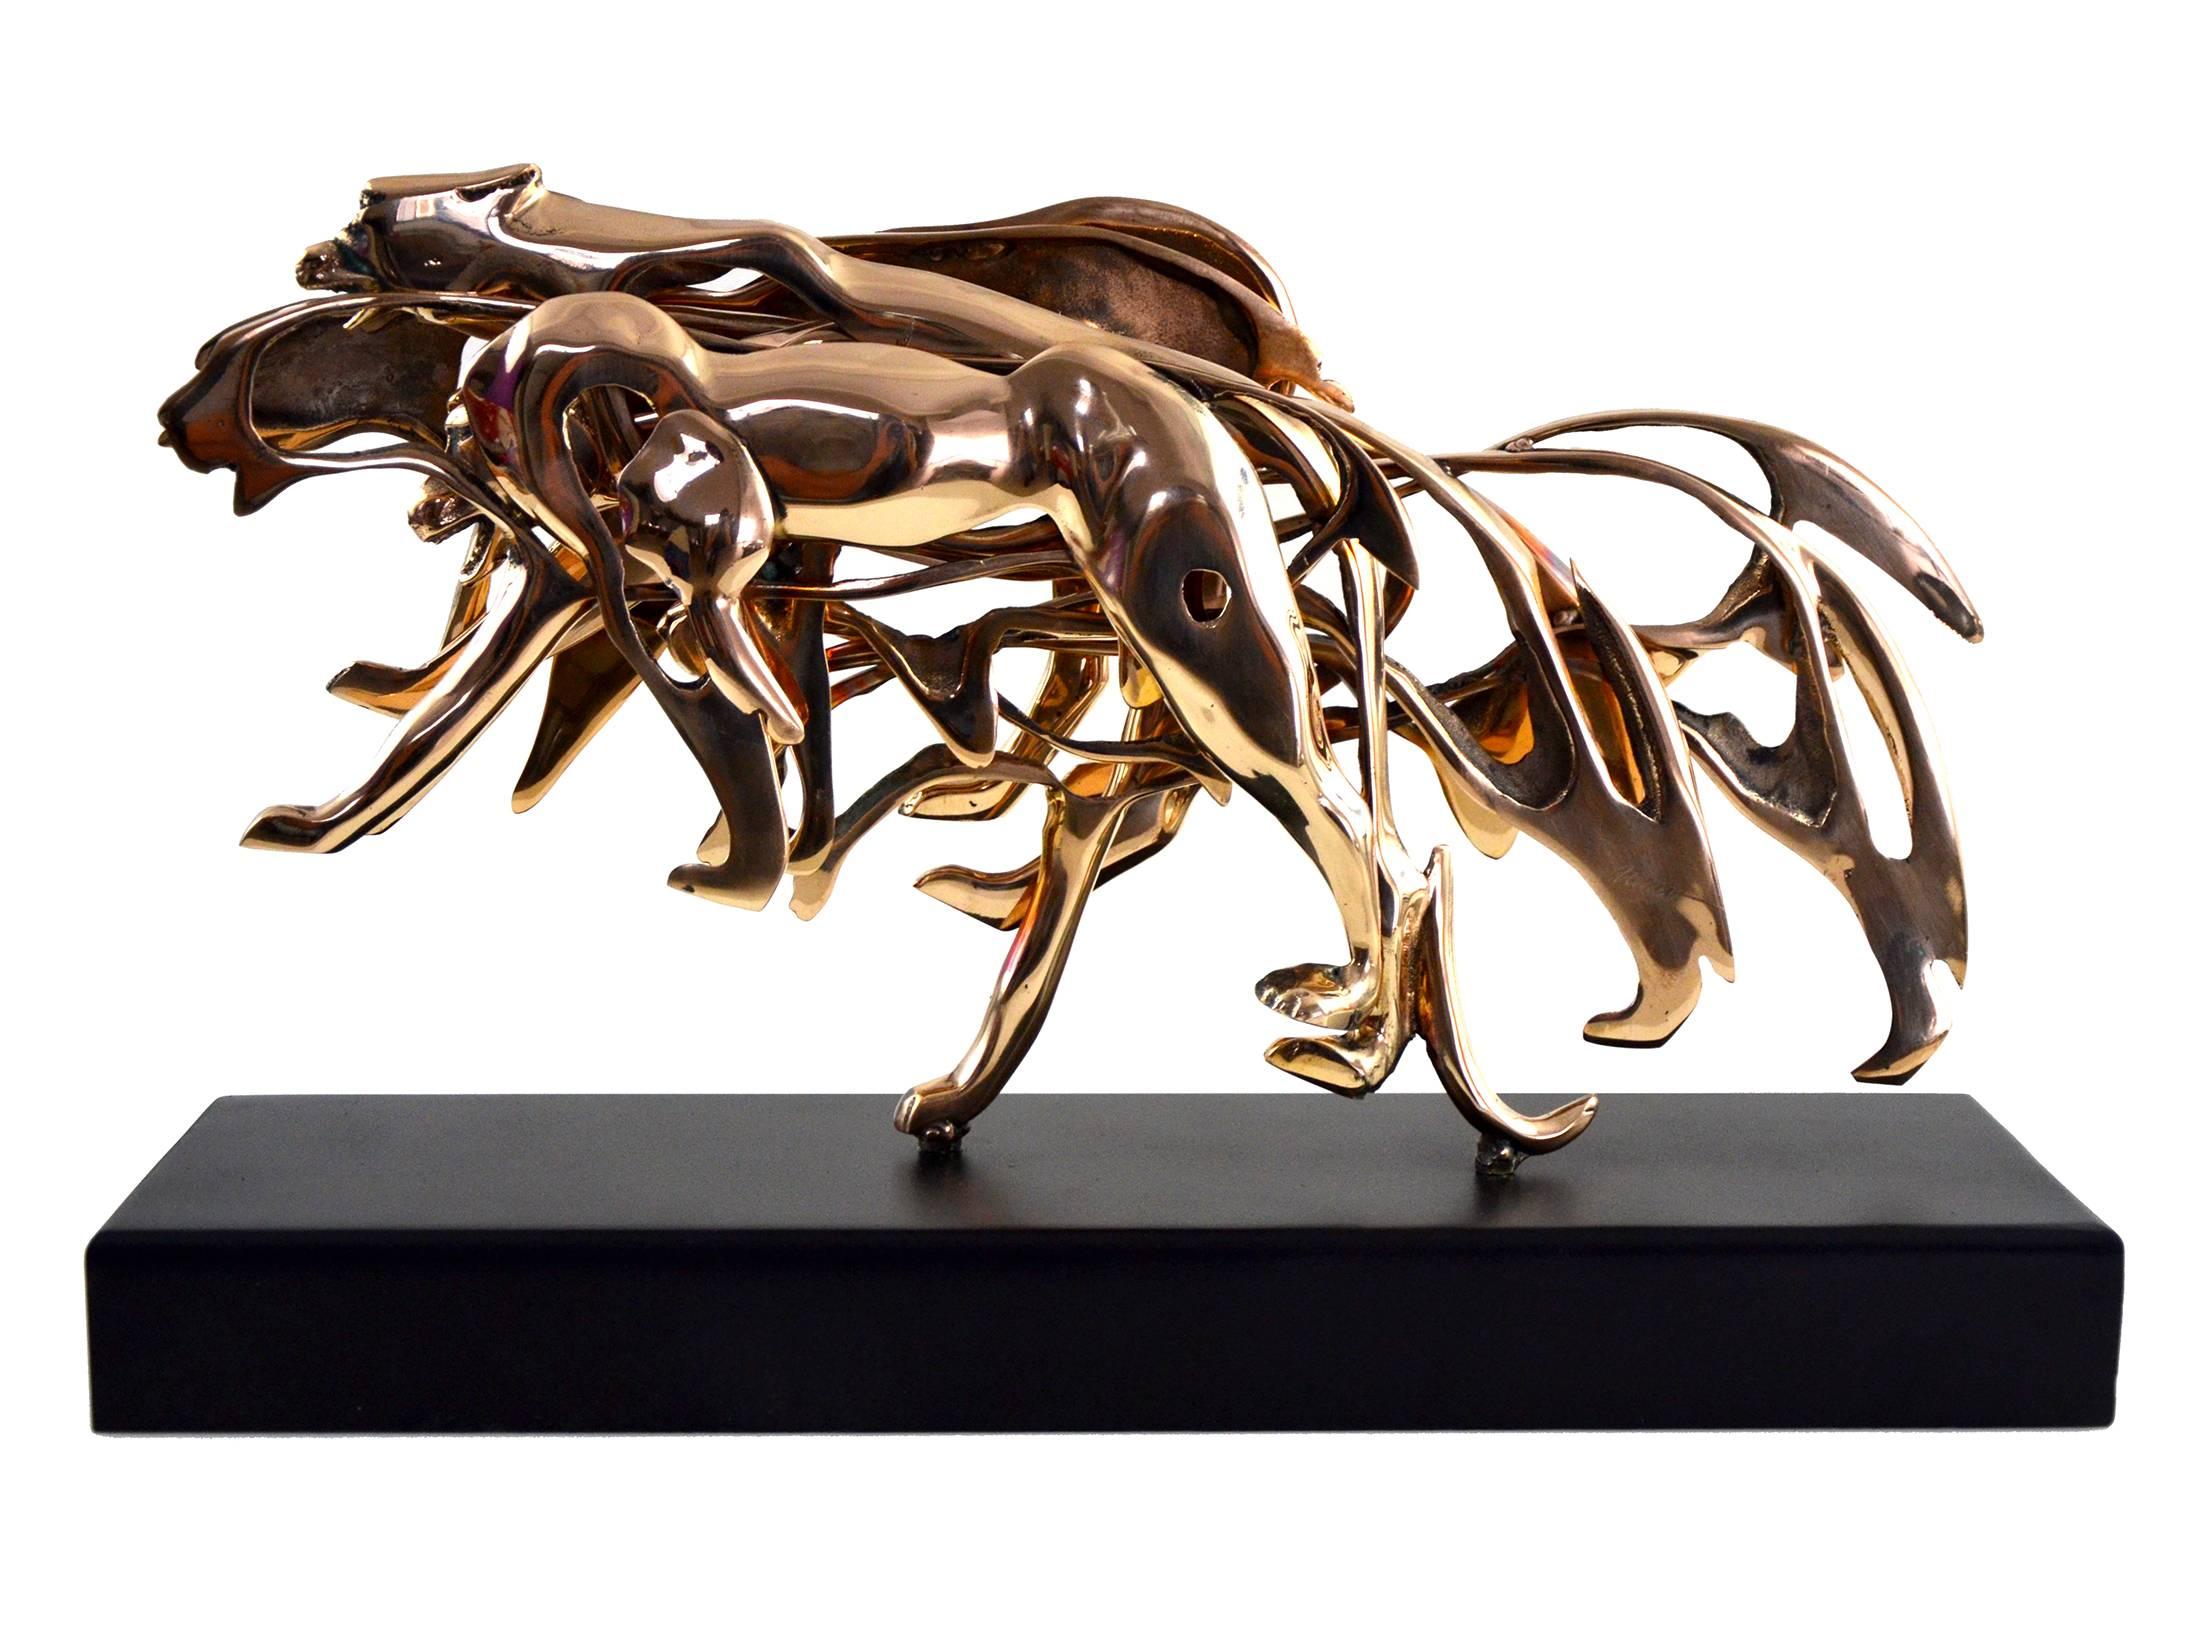 Arman's bronze gilded panther's sculpture.
His animal sculptures are very rare and recognized for their originality and their beauty.

Material: Bronze.
Dimensions: 31 x 50 x 9 cm
Edition: 99

Arman is a painter who moved from using objects